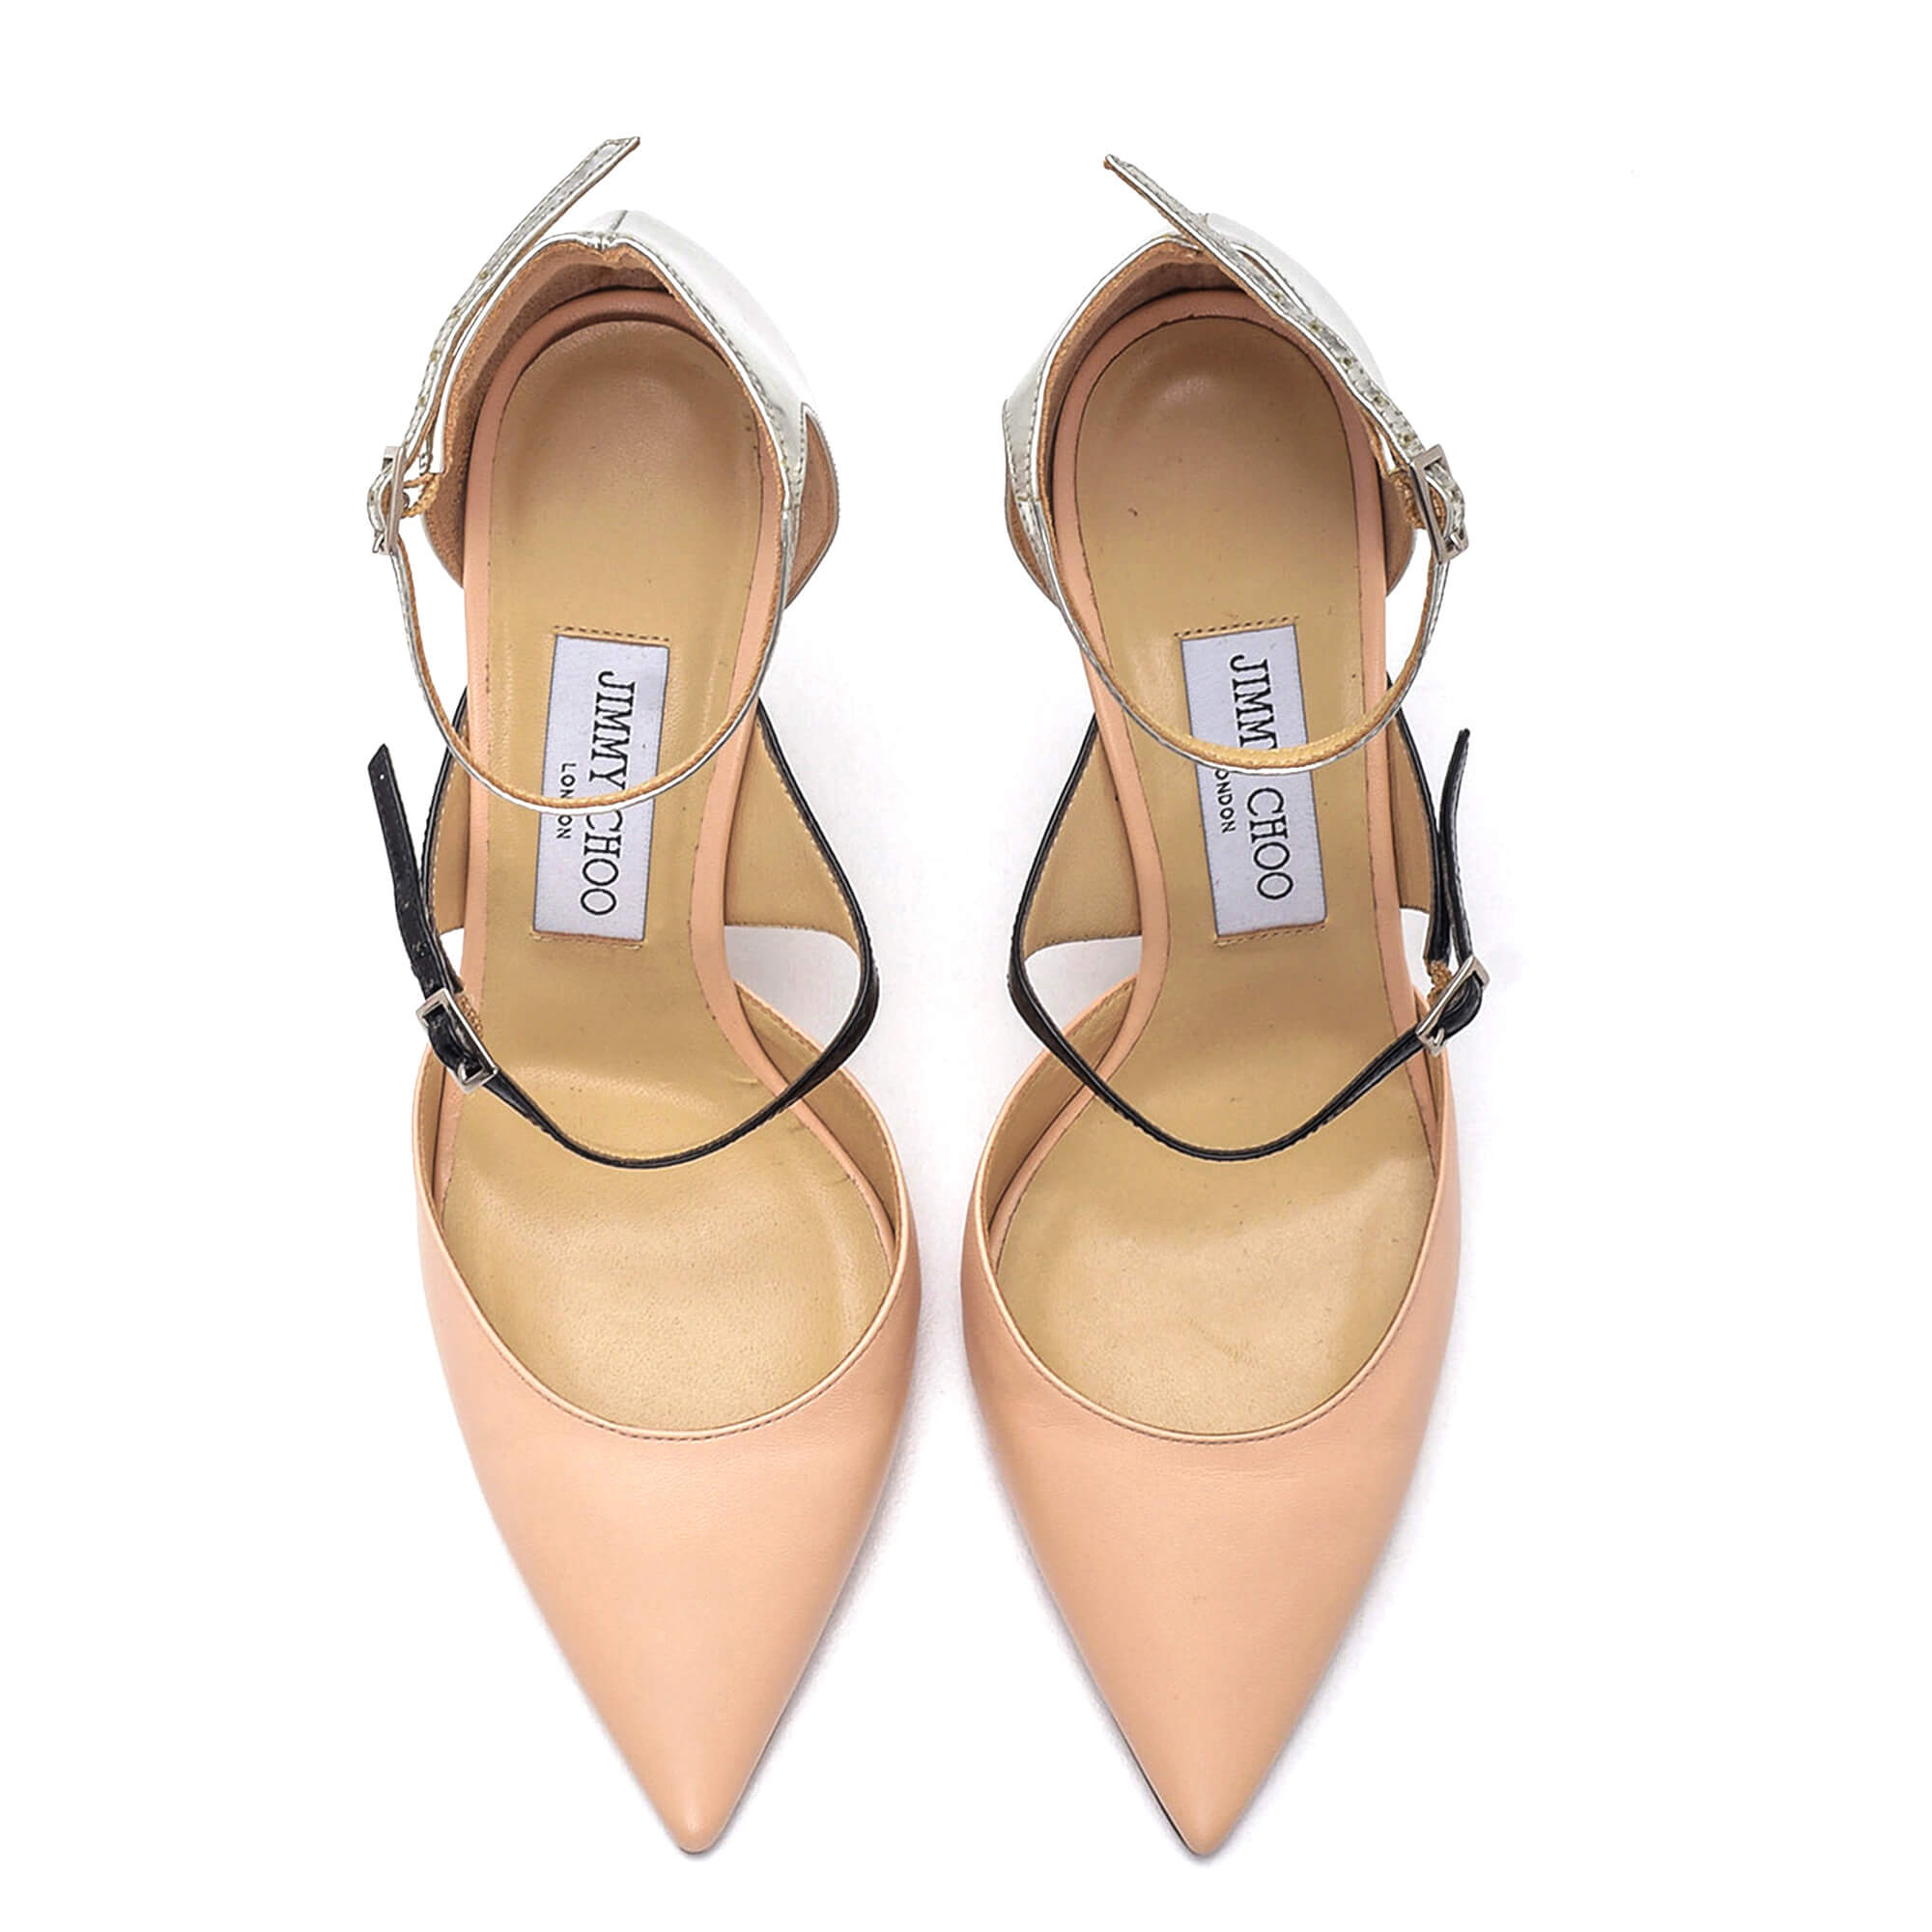 Jimmy Choo - Tri Color Powder Pink Leather Ankle Strap Sunday Pumps 